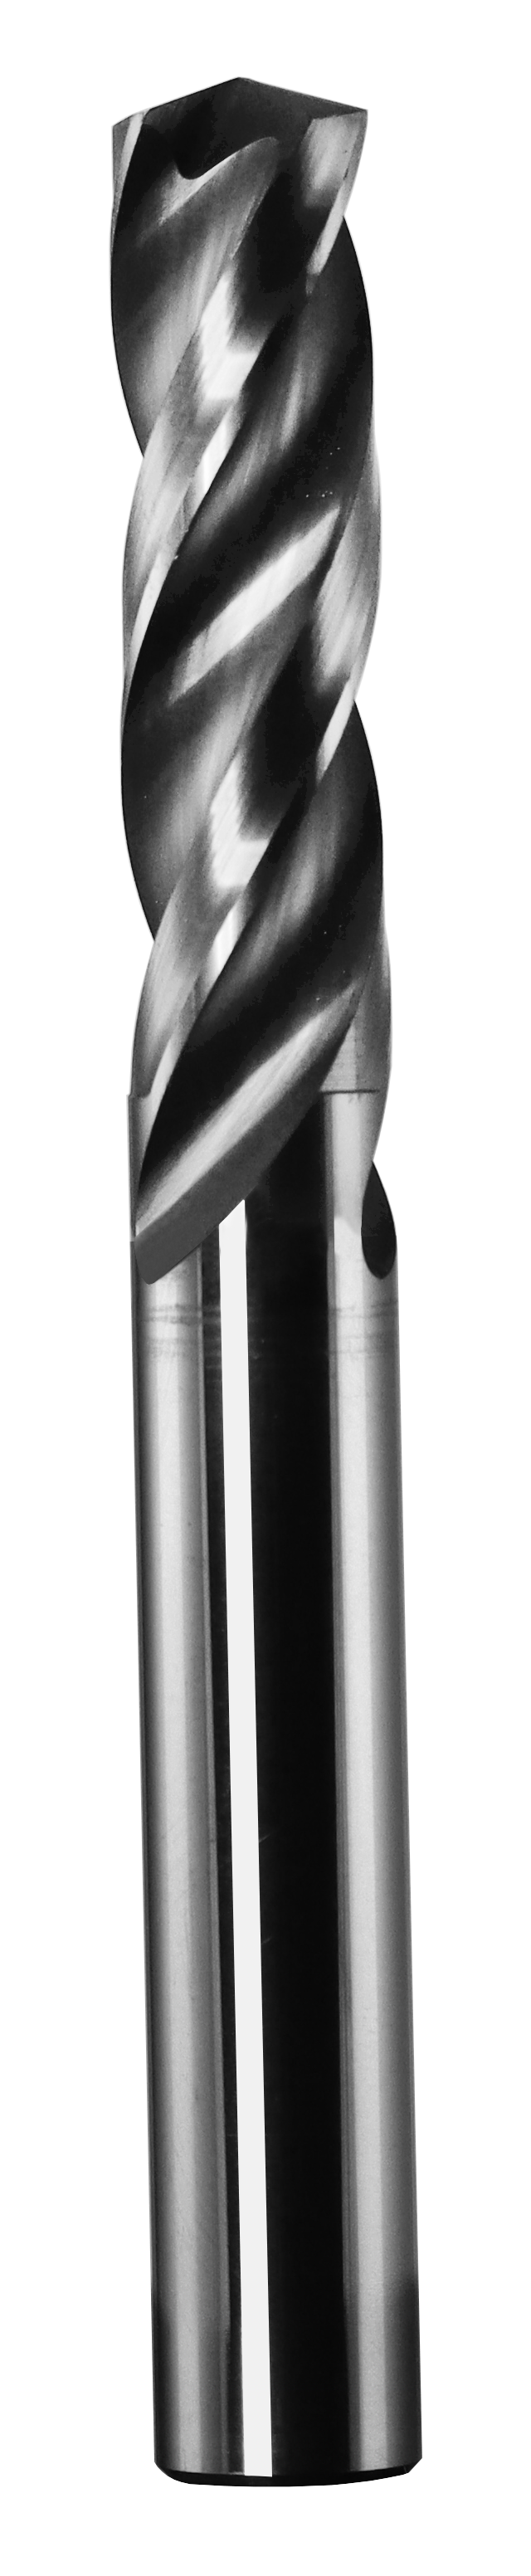 19.50mm Dia, 150 Degree Point, Solid Carbide Drill - 63042